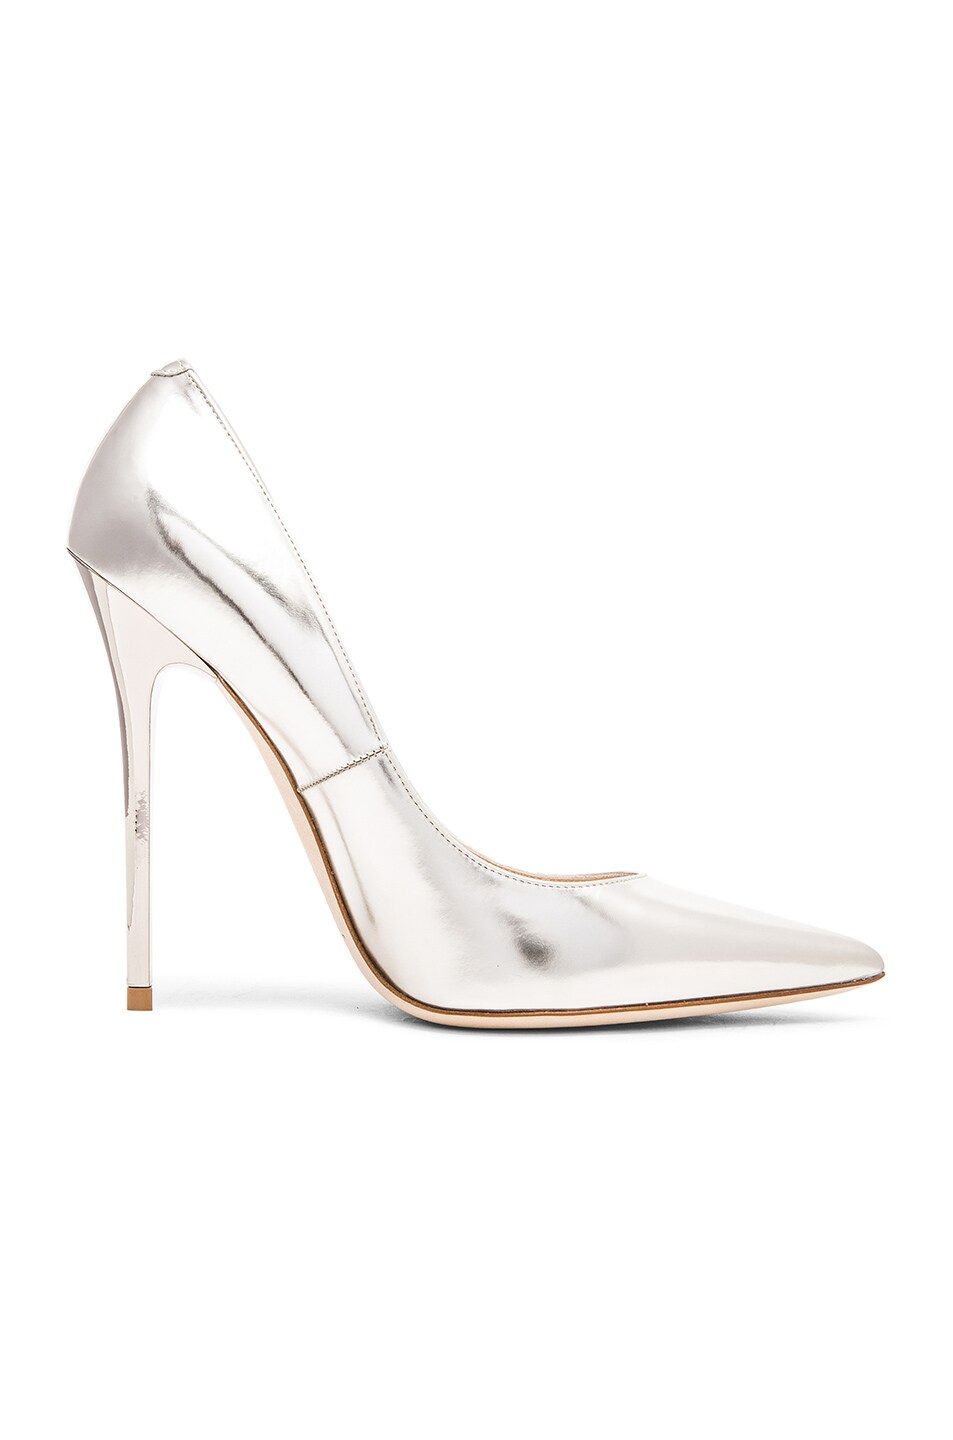 Image 1 of Jimmy Choo Anouk Leather Heels in Silver